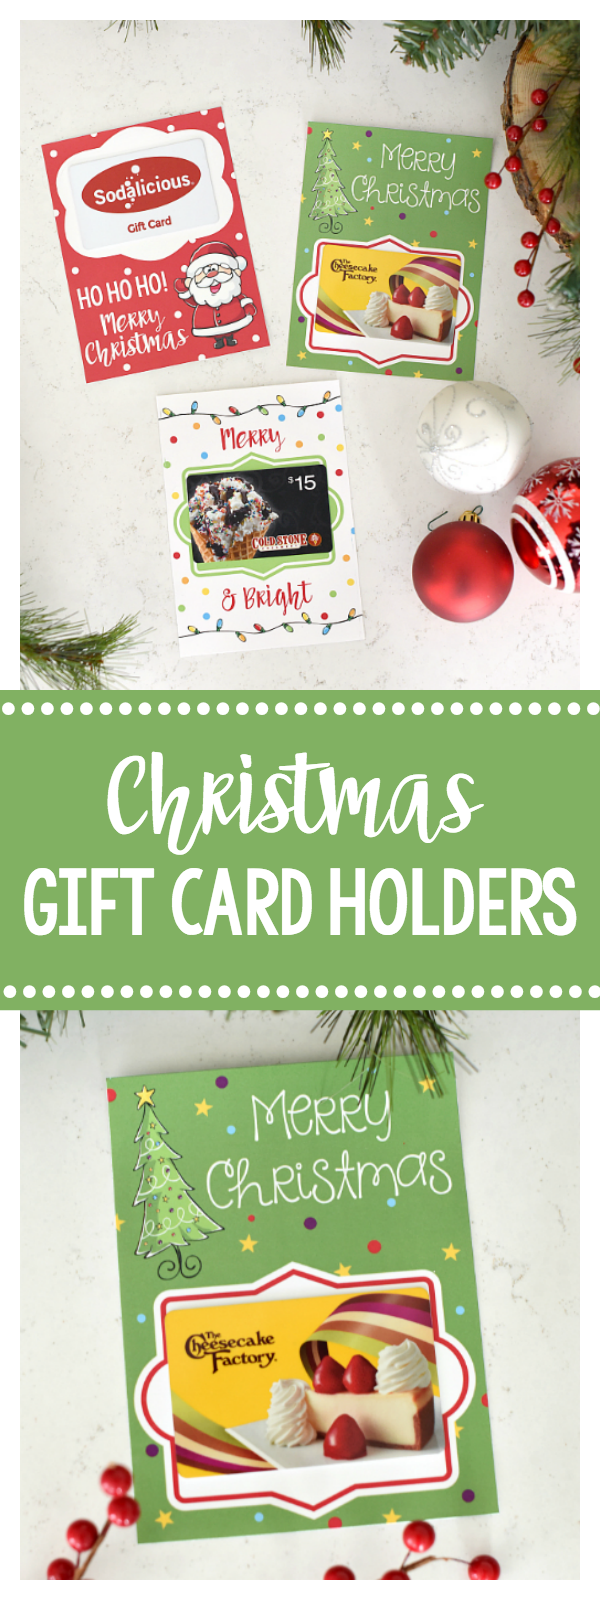 Printable Christmas Gift Card Holders-All you've got to do is add the gift card to these cute printable gift card holders and you've got a great Christmas gift for a friend, teacher or anyone! #christmas #christmasgifts #neighborgifts